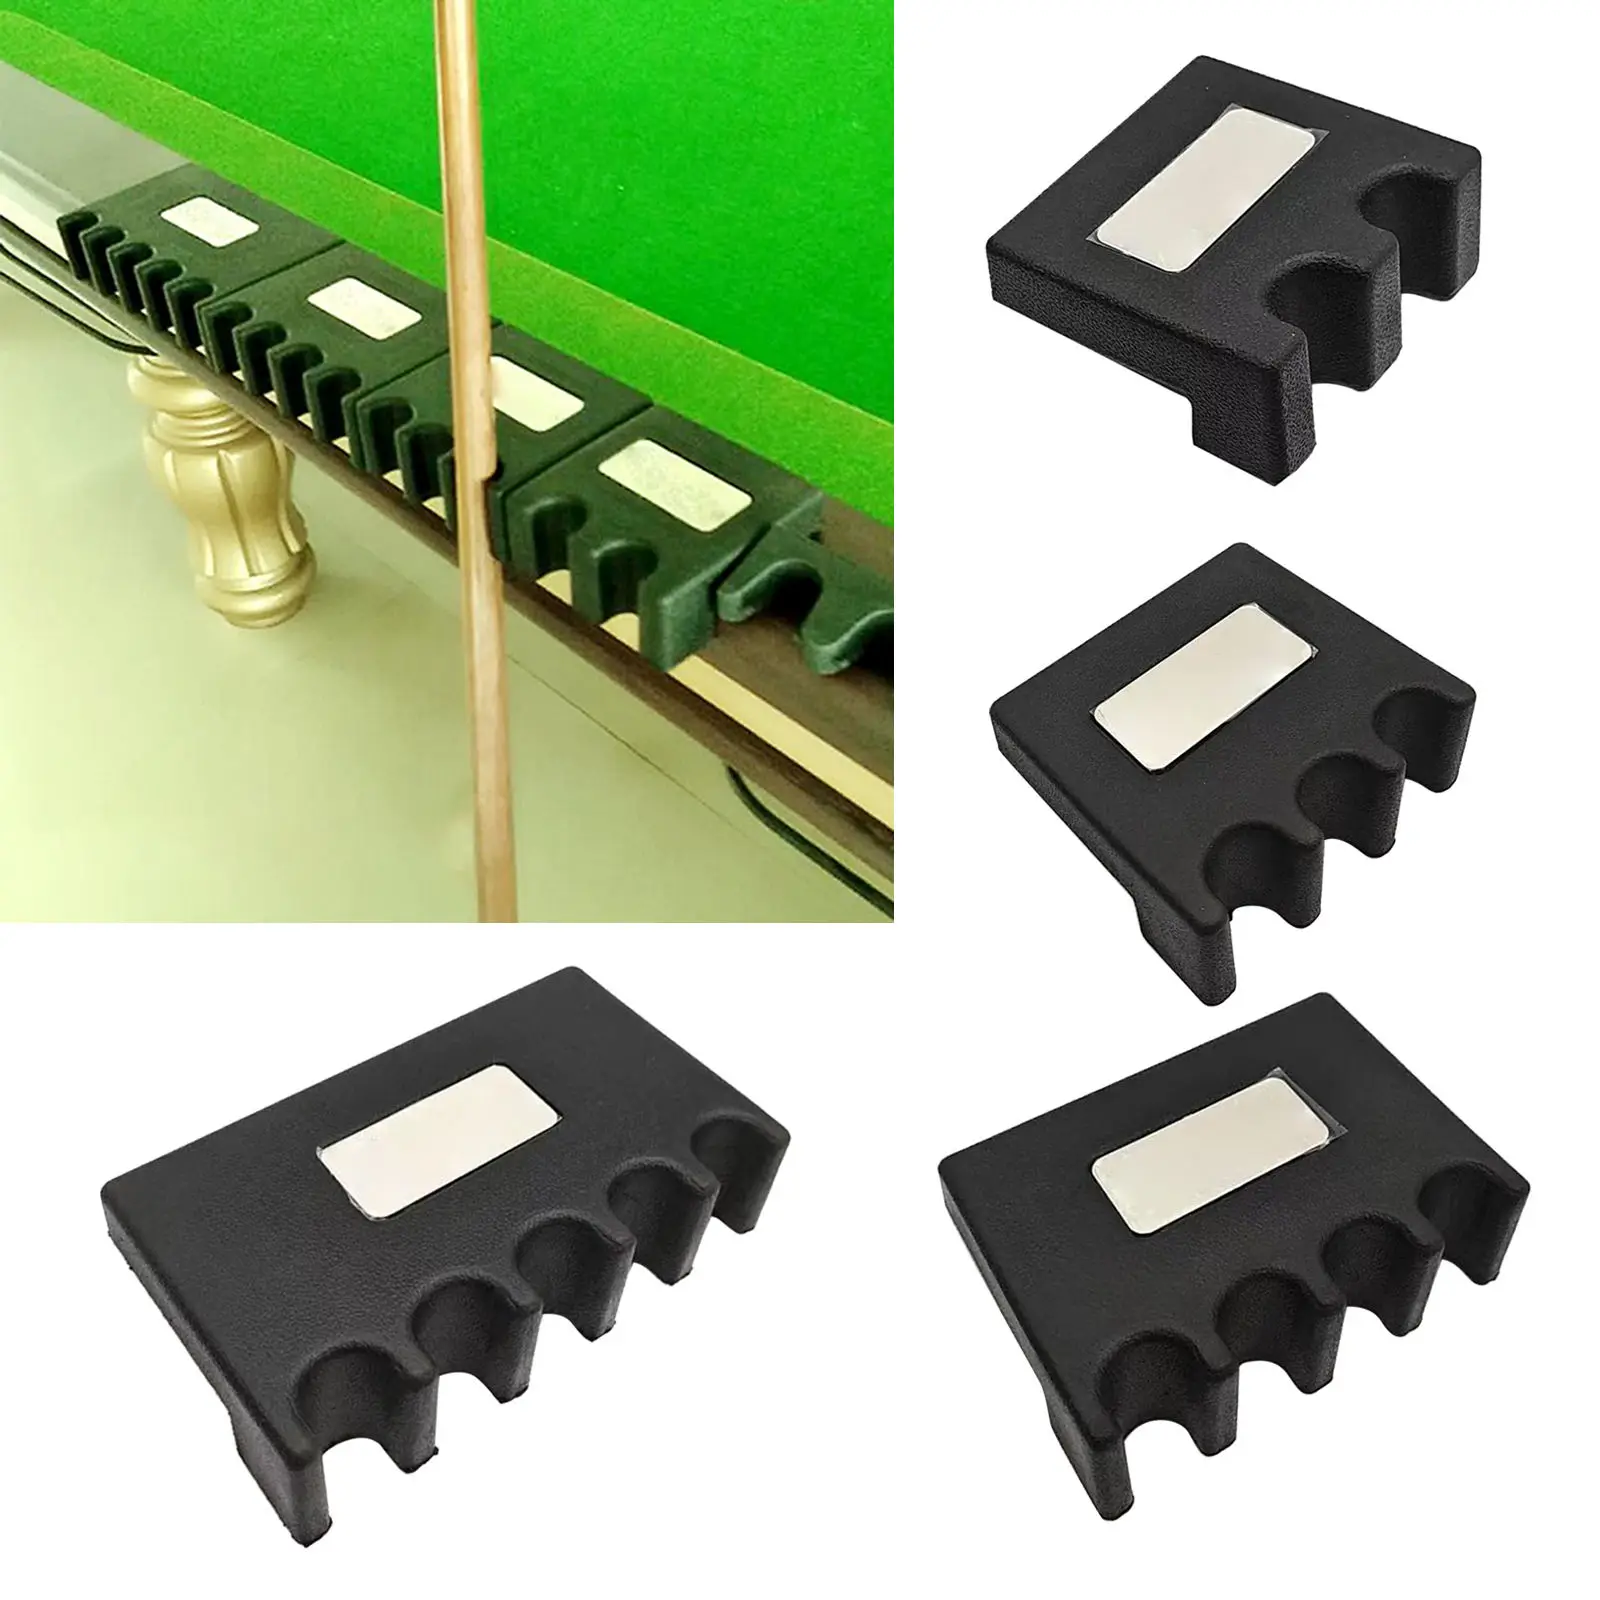 Details about   Billiards Snooker Pool Cue Holder Cue Stick Rest for Hold 2 to 5 Cue Stick